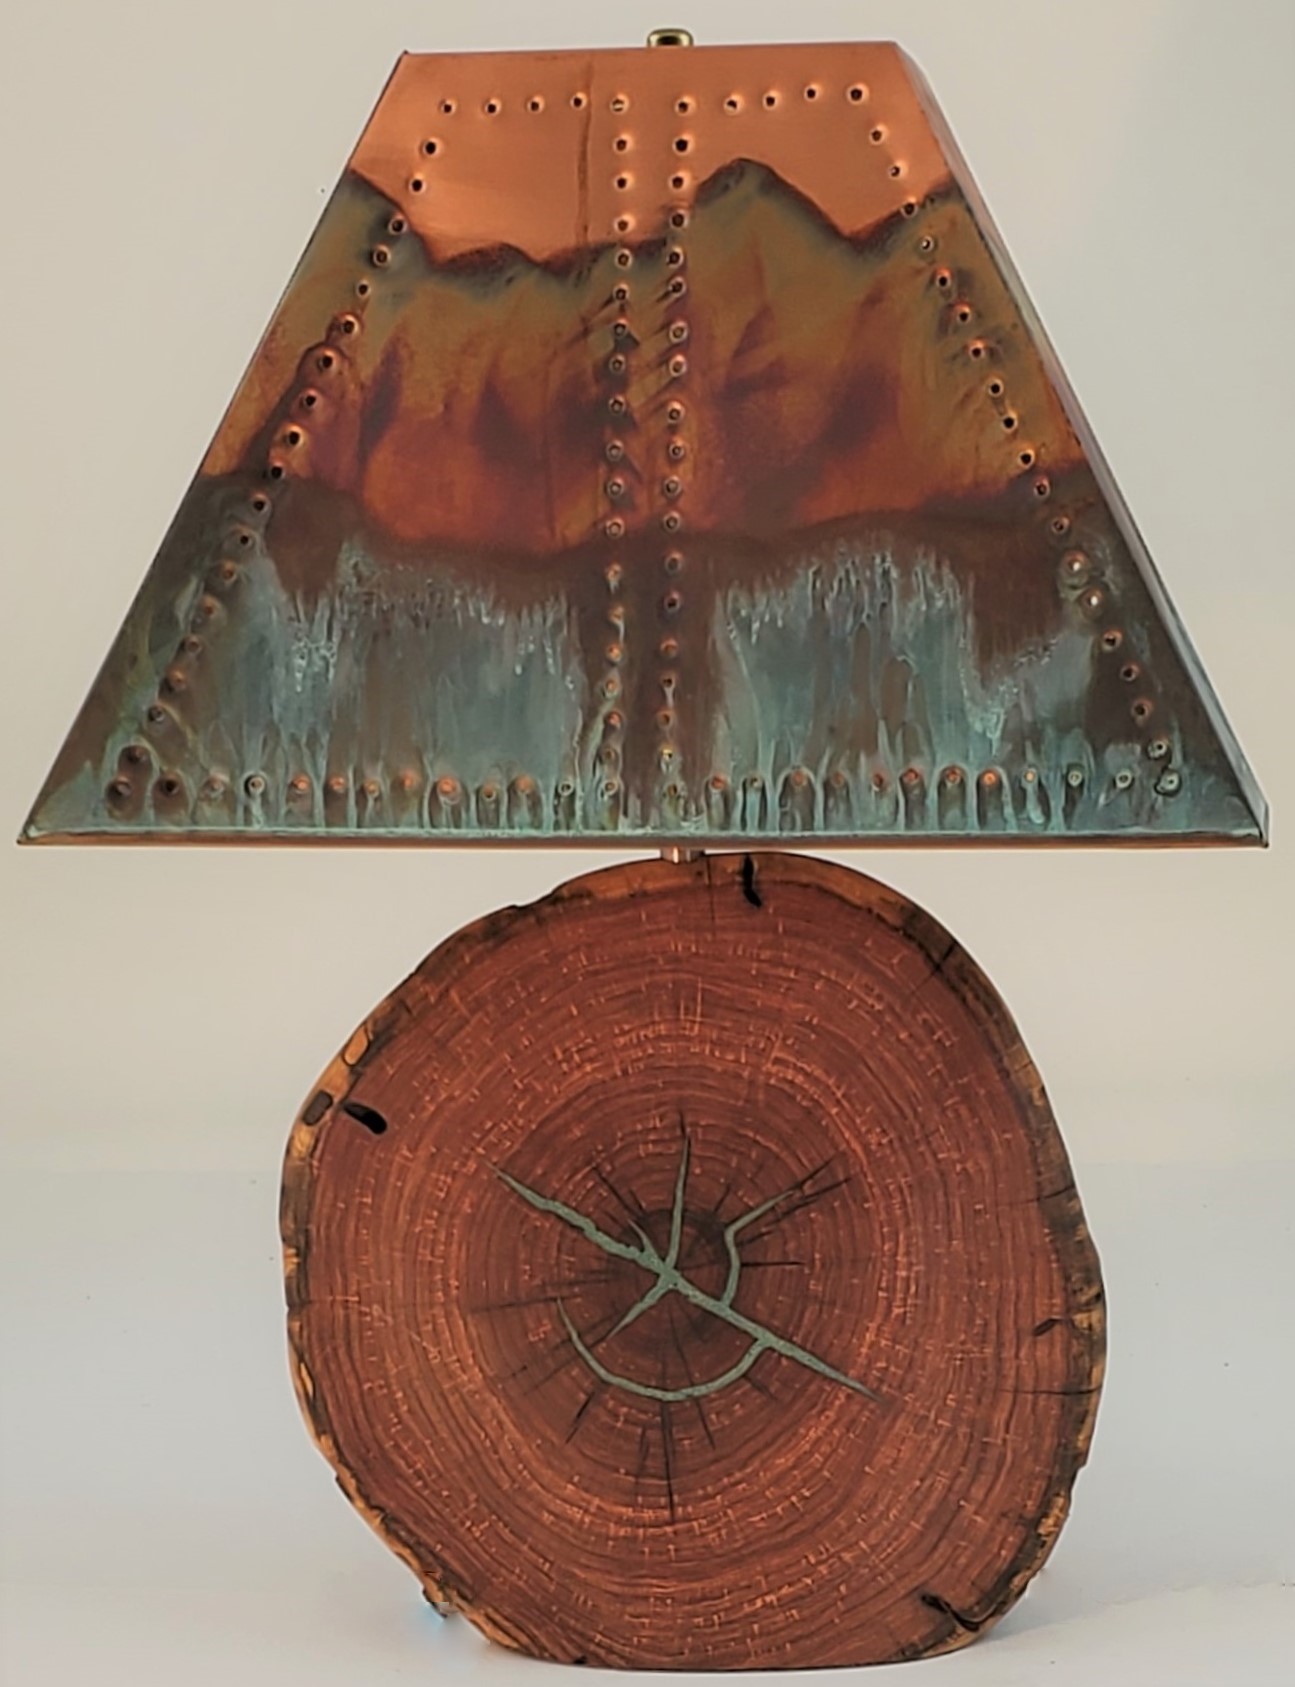 Mesquite Lamp with Turquoise Inlay and Copper Shade (Height: 21") #1024